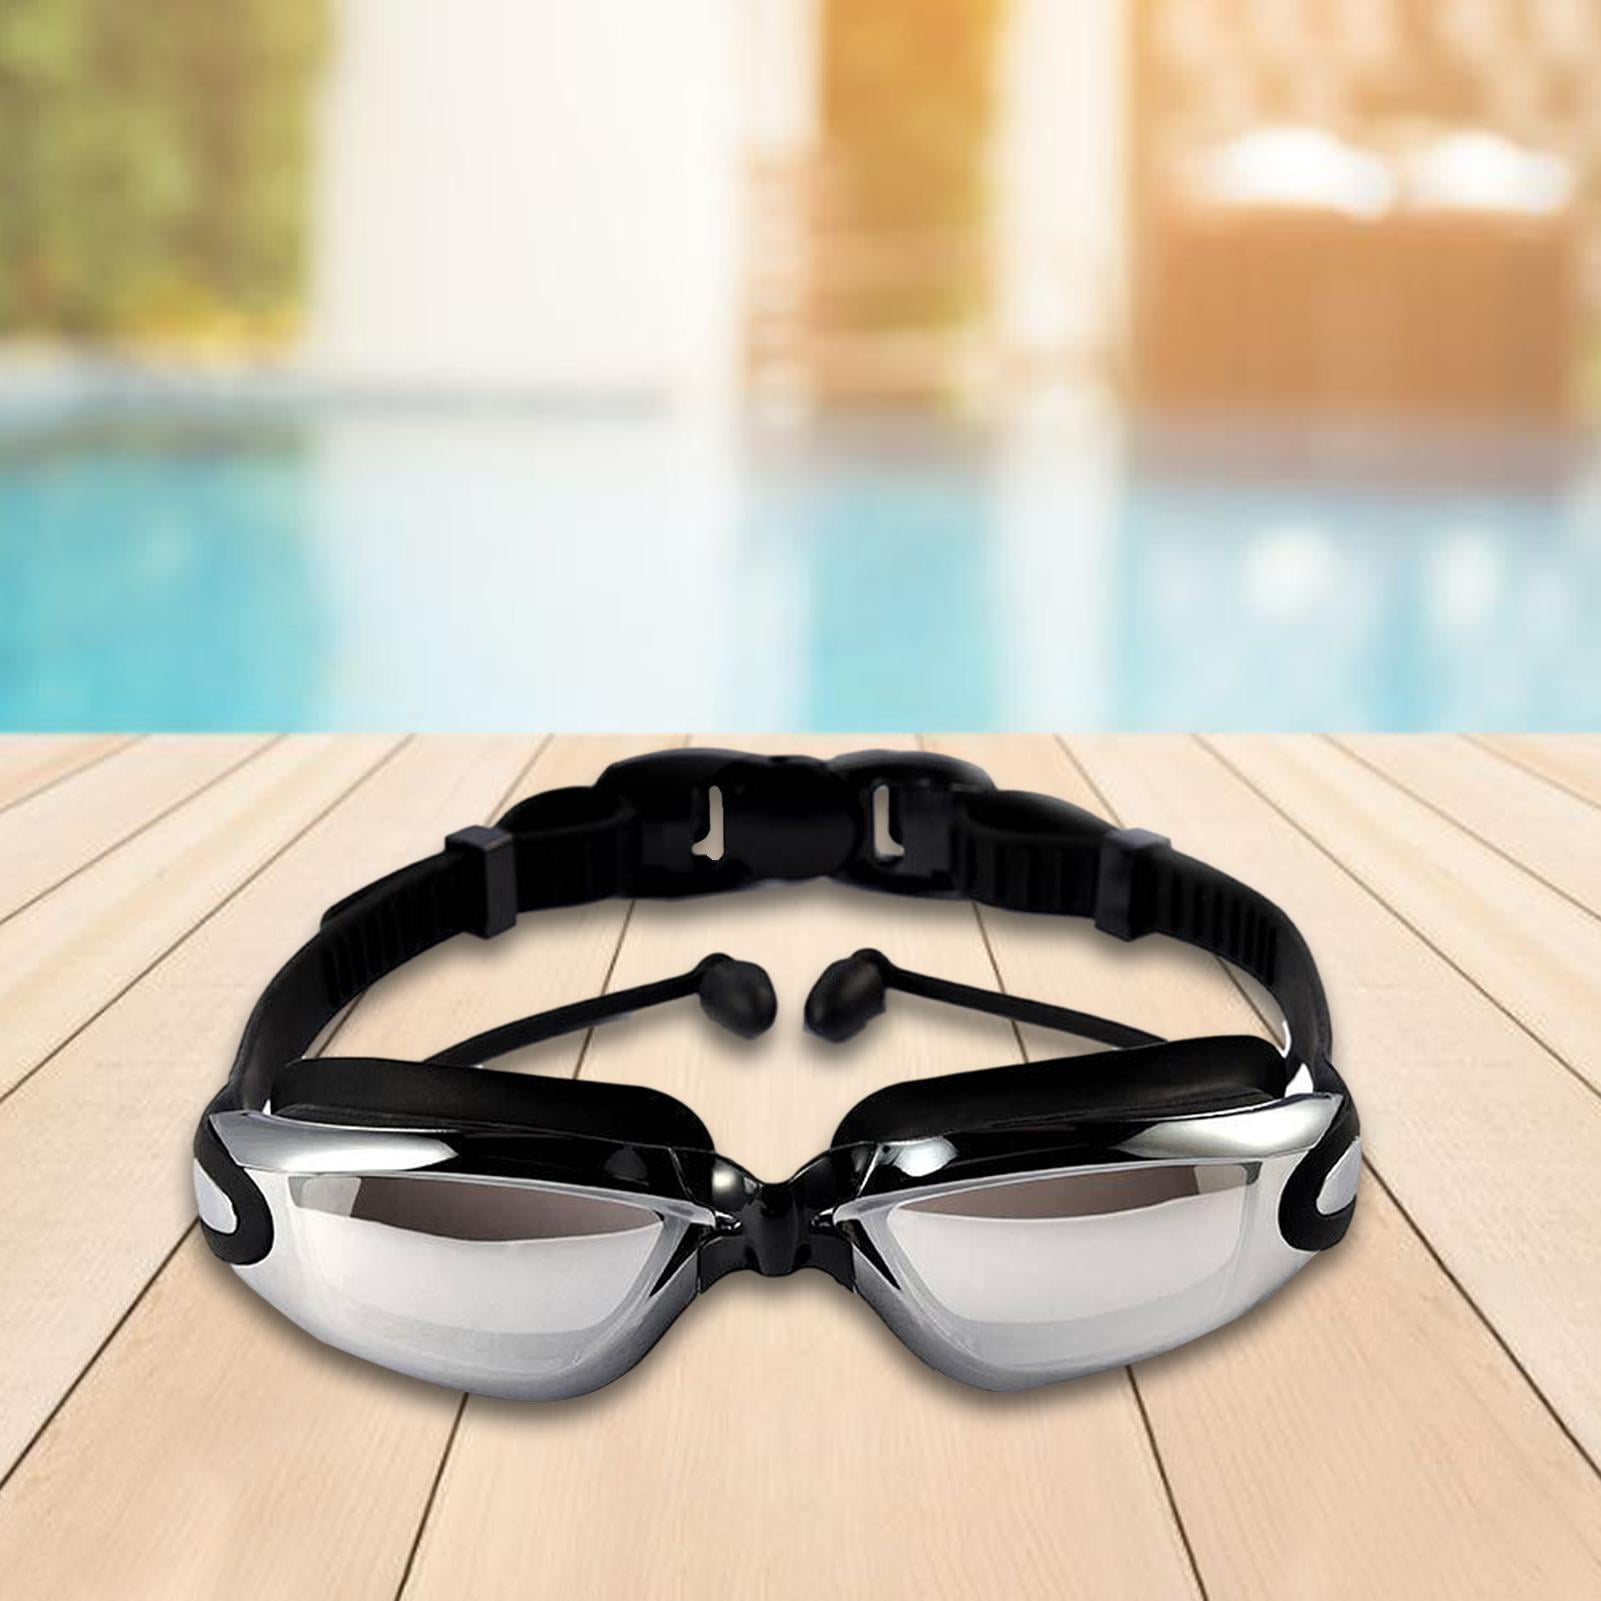 Details about   Adjustable Adult Unisex Swimming HD Goggles Anti Fog UV Protect Training Glasses 